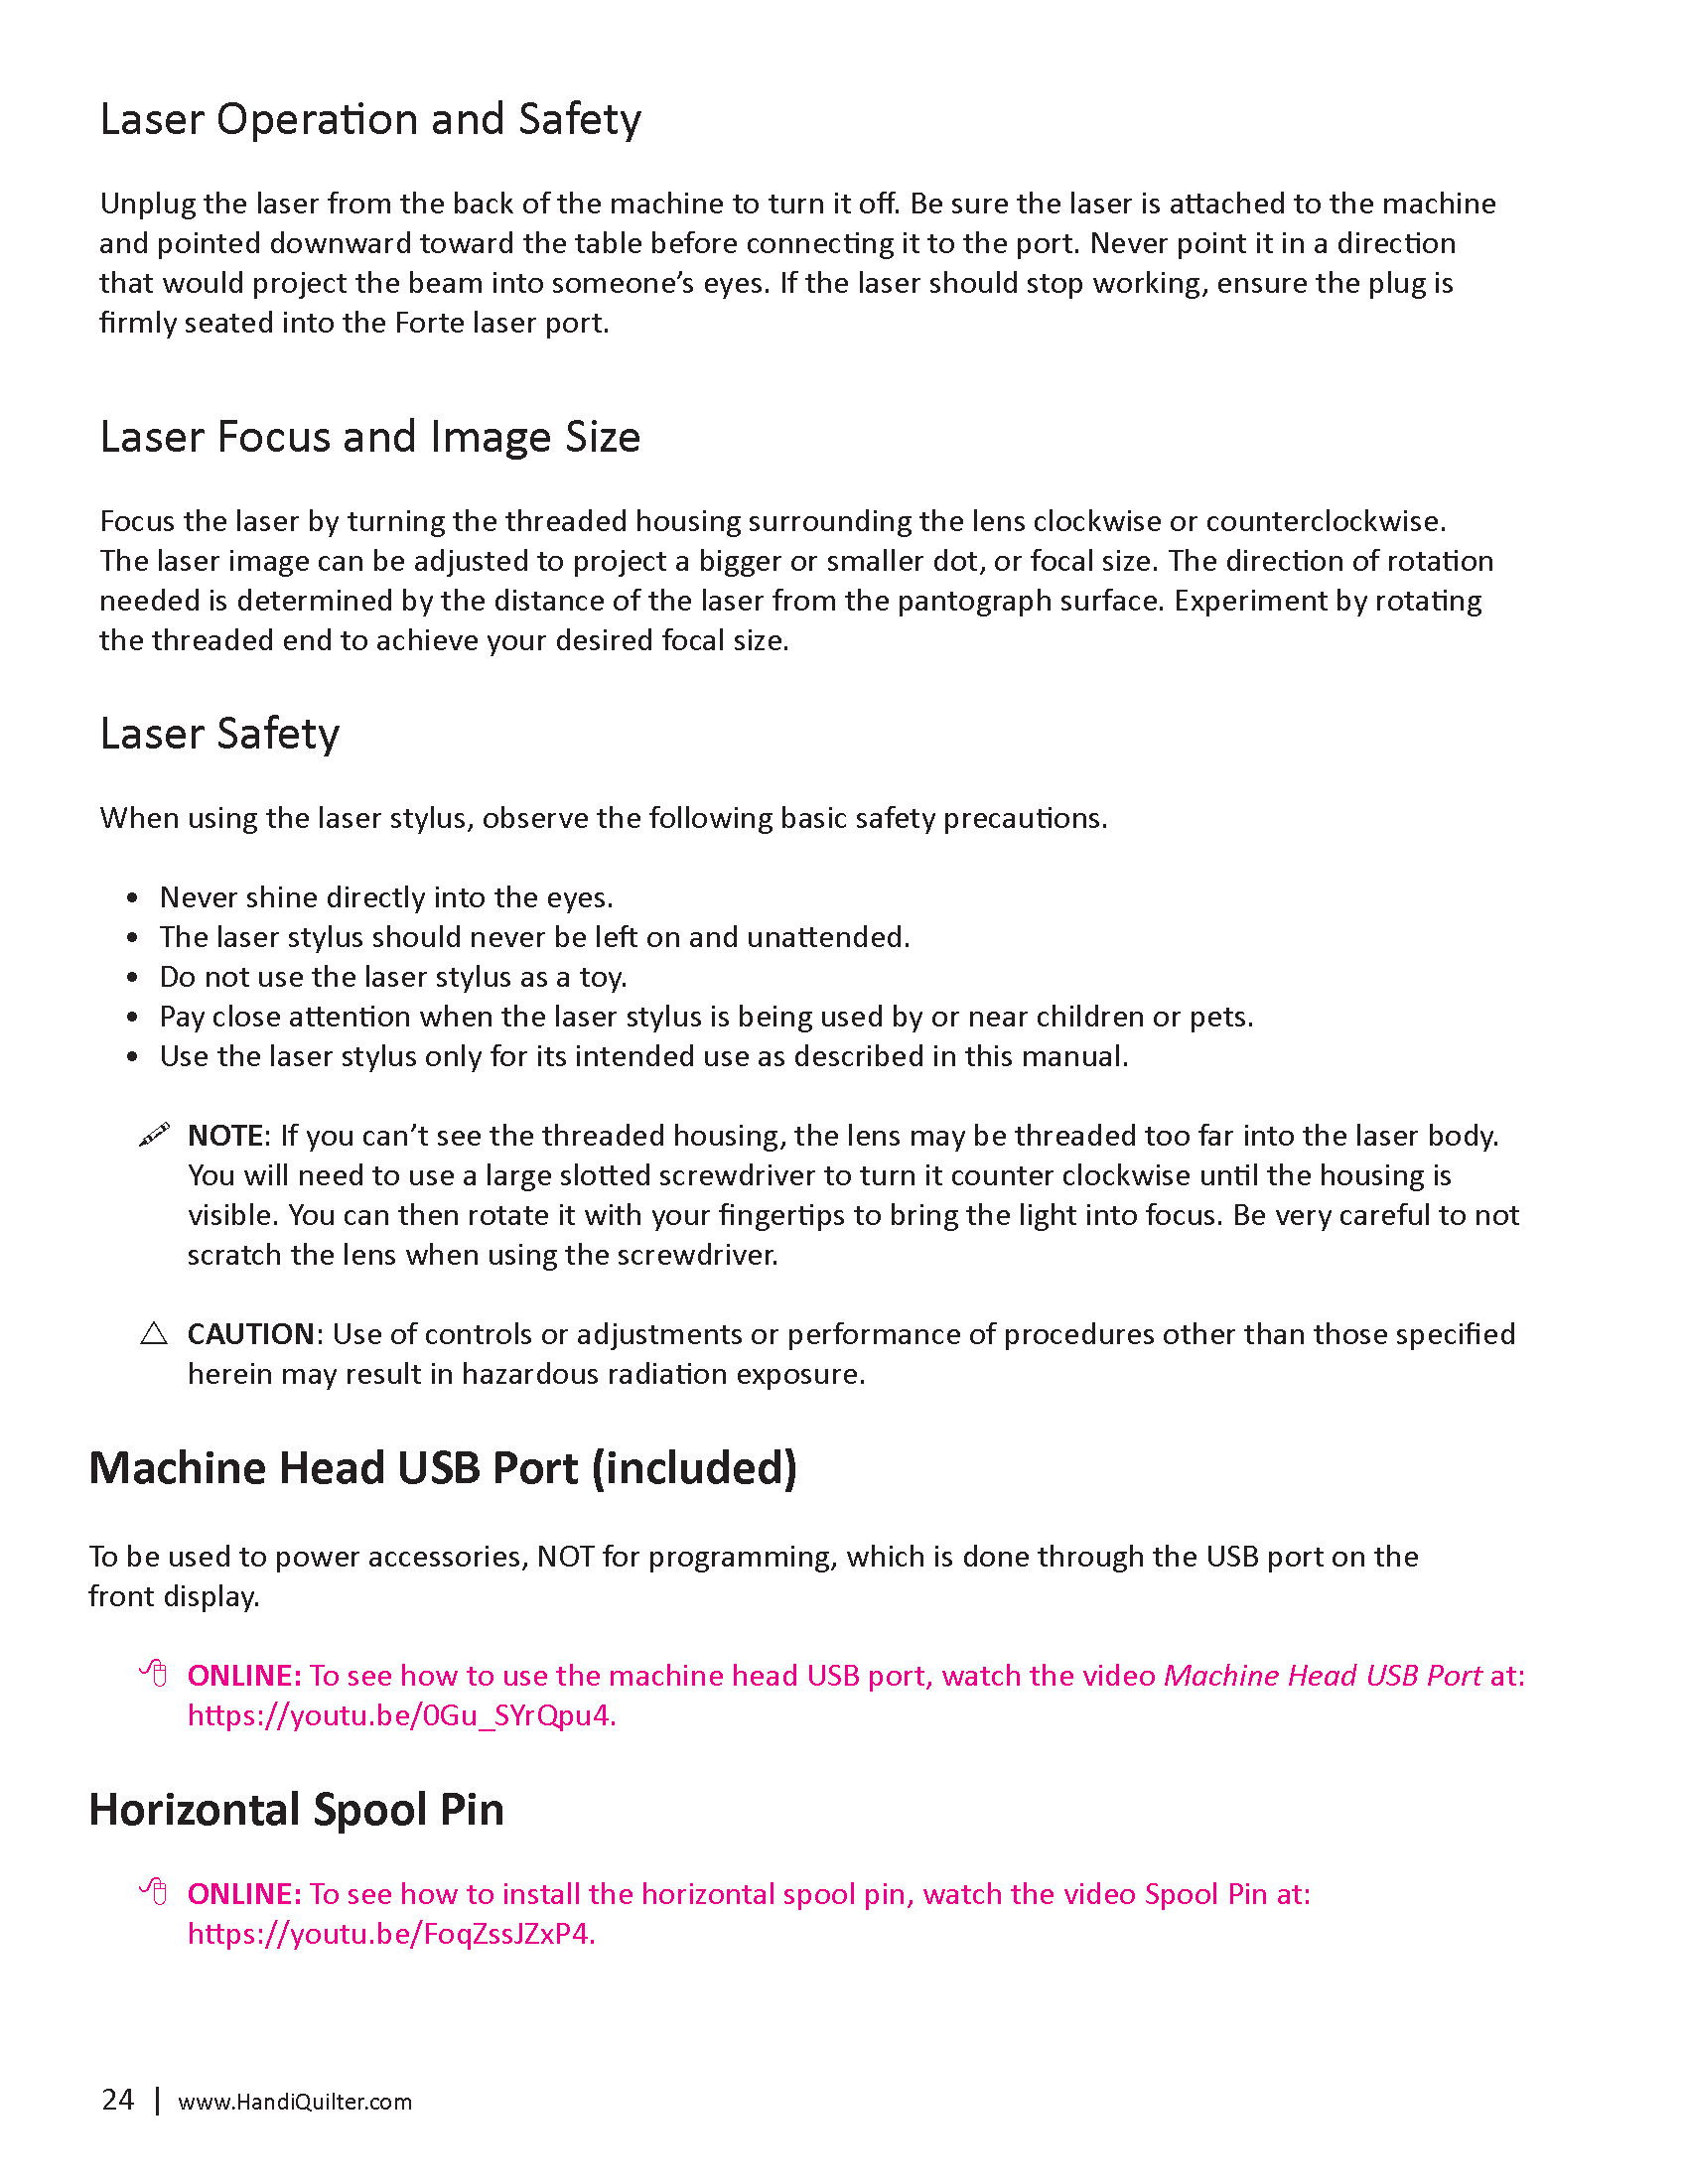 HQ-Forte-User-Manual-ALL-2_Page_25.png